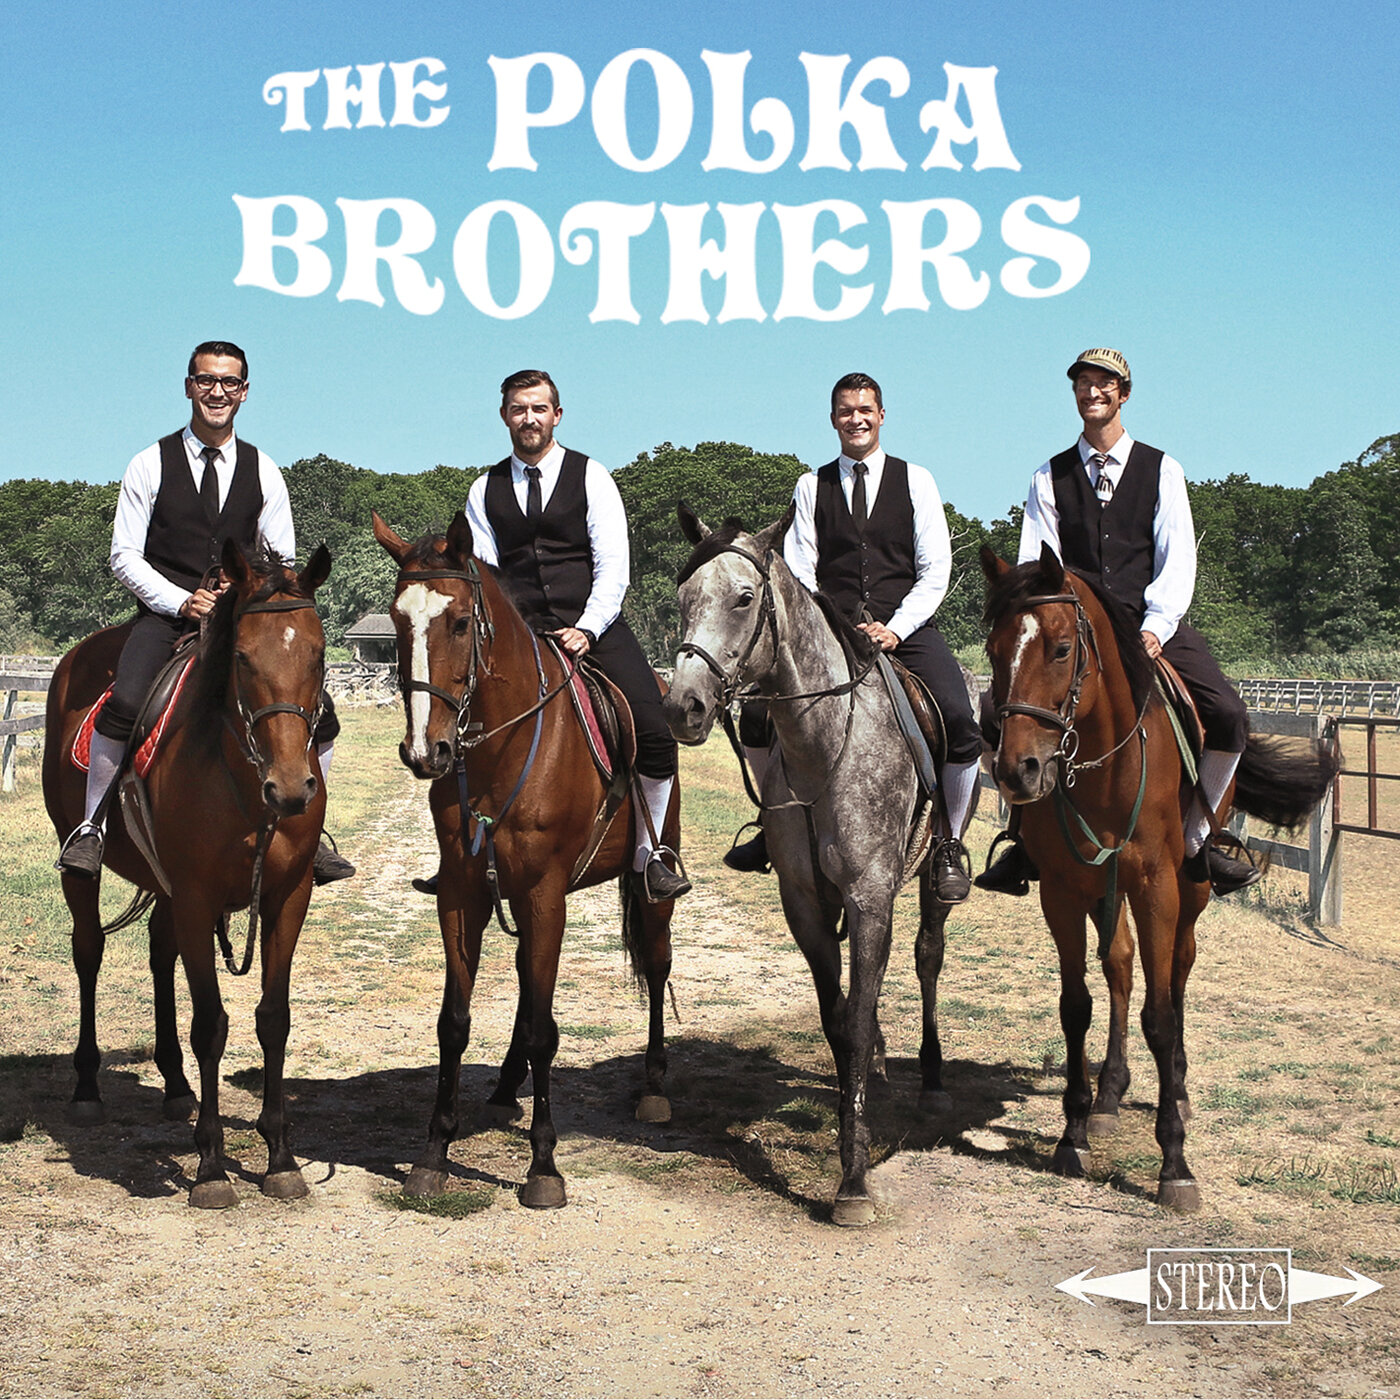 ThePolkaBrothers_Cover_1400_1400.jpg